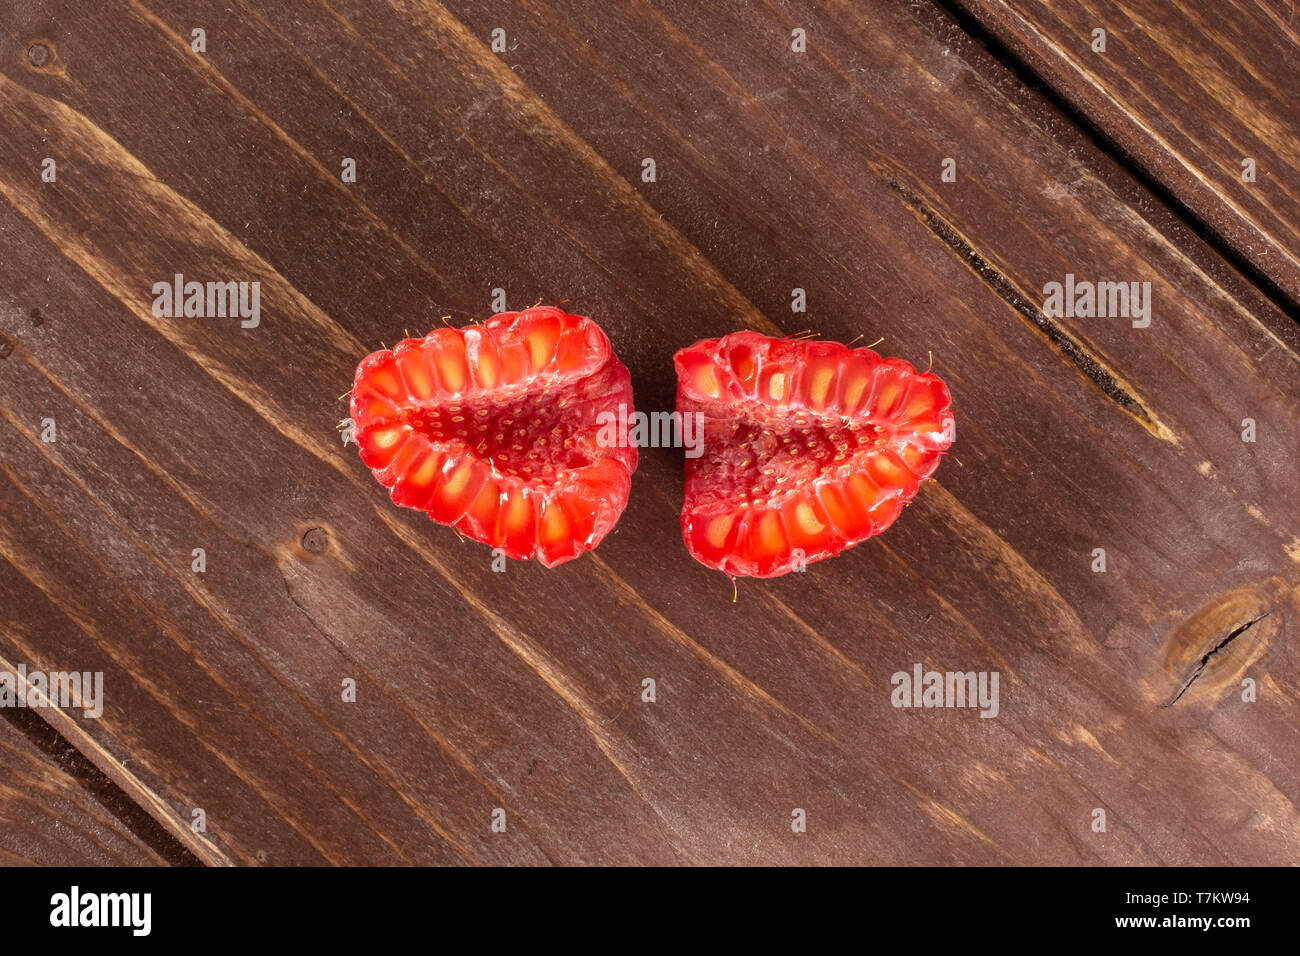 Group of two halves of fresh red raspberry cross section flatlay on brown wood Stock Photo